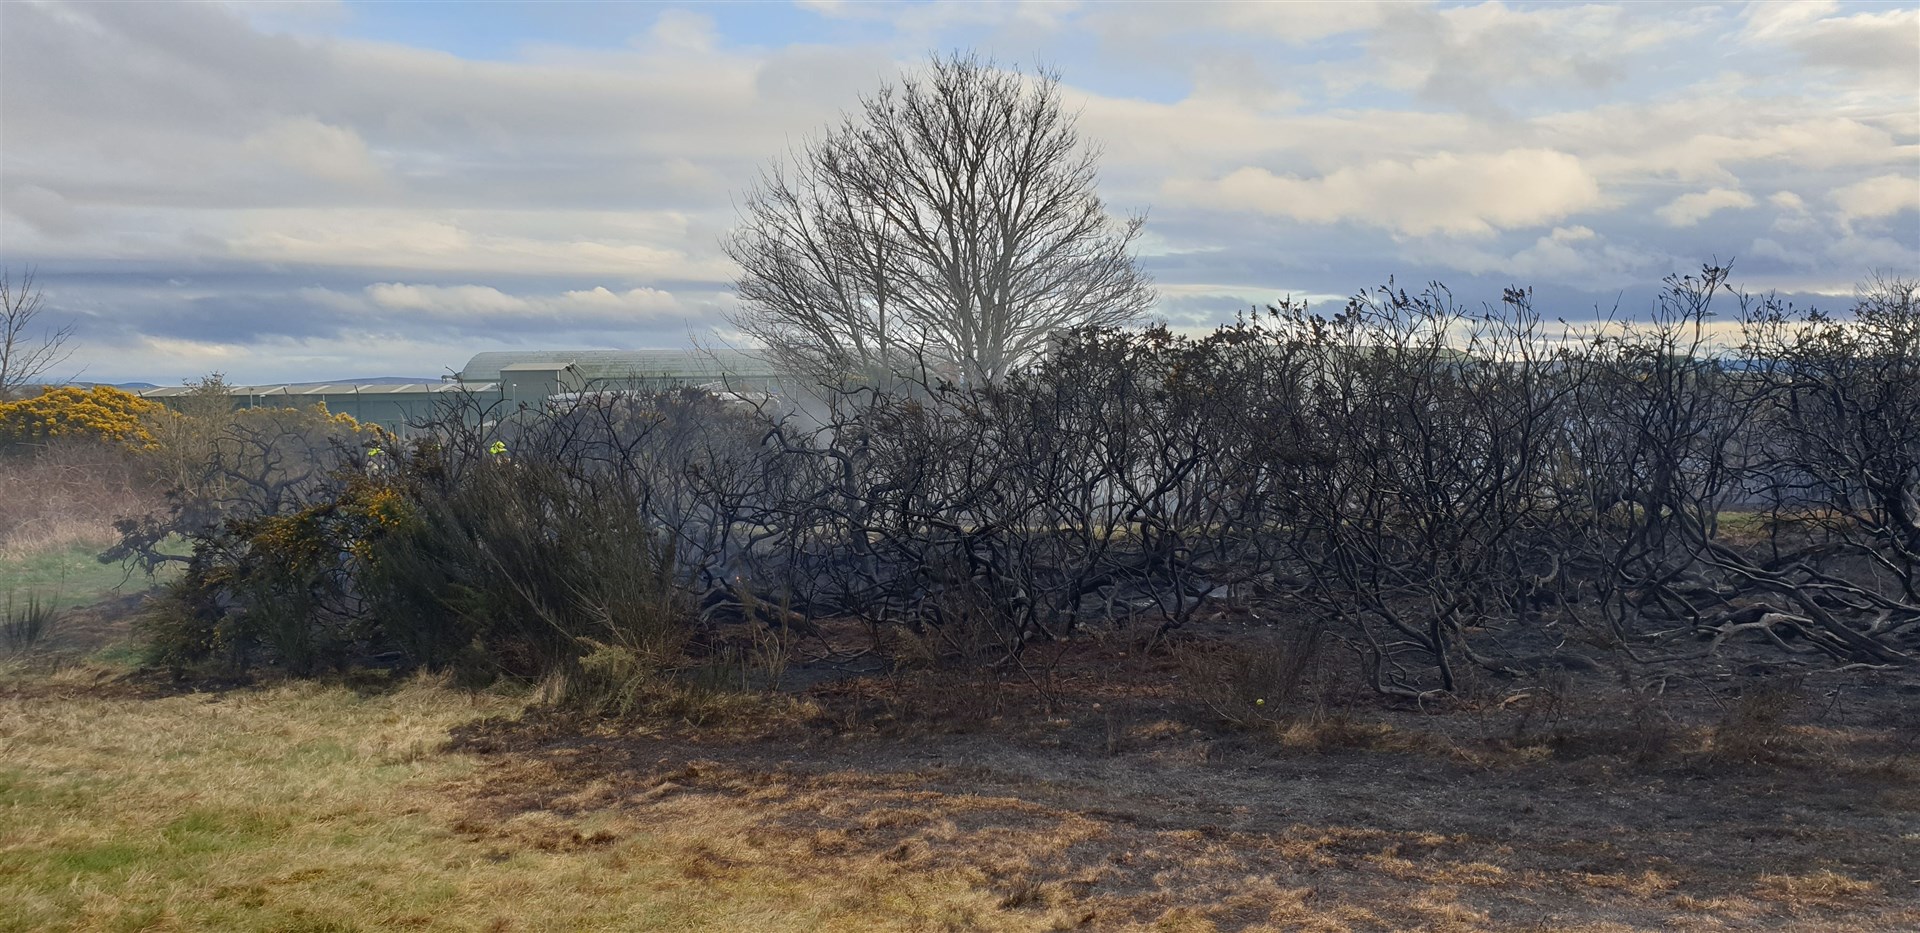 Fire crews from Lossiemouth and Elgin attended the scene.